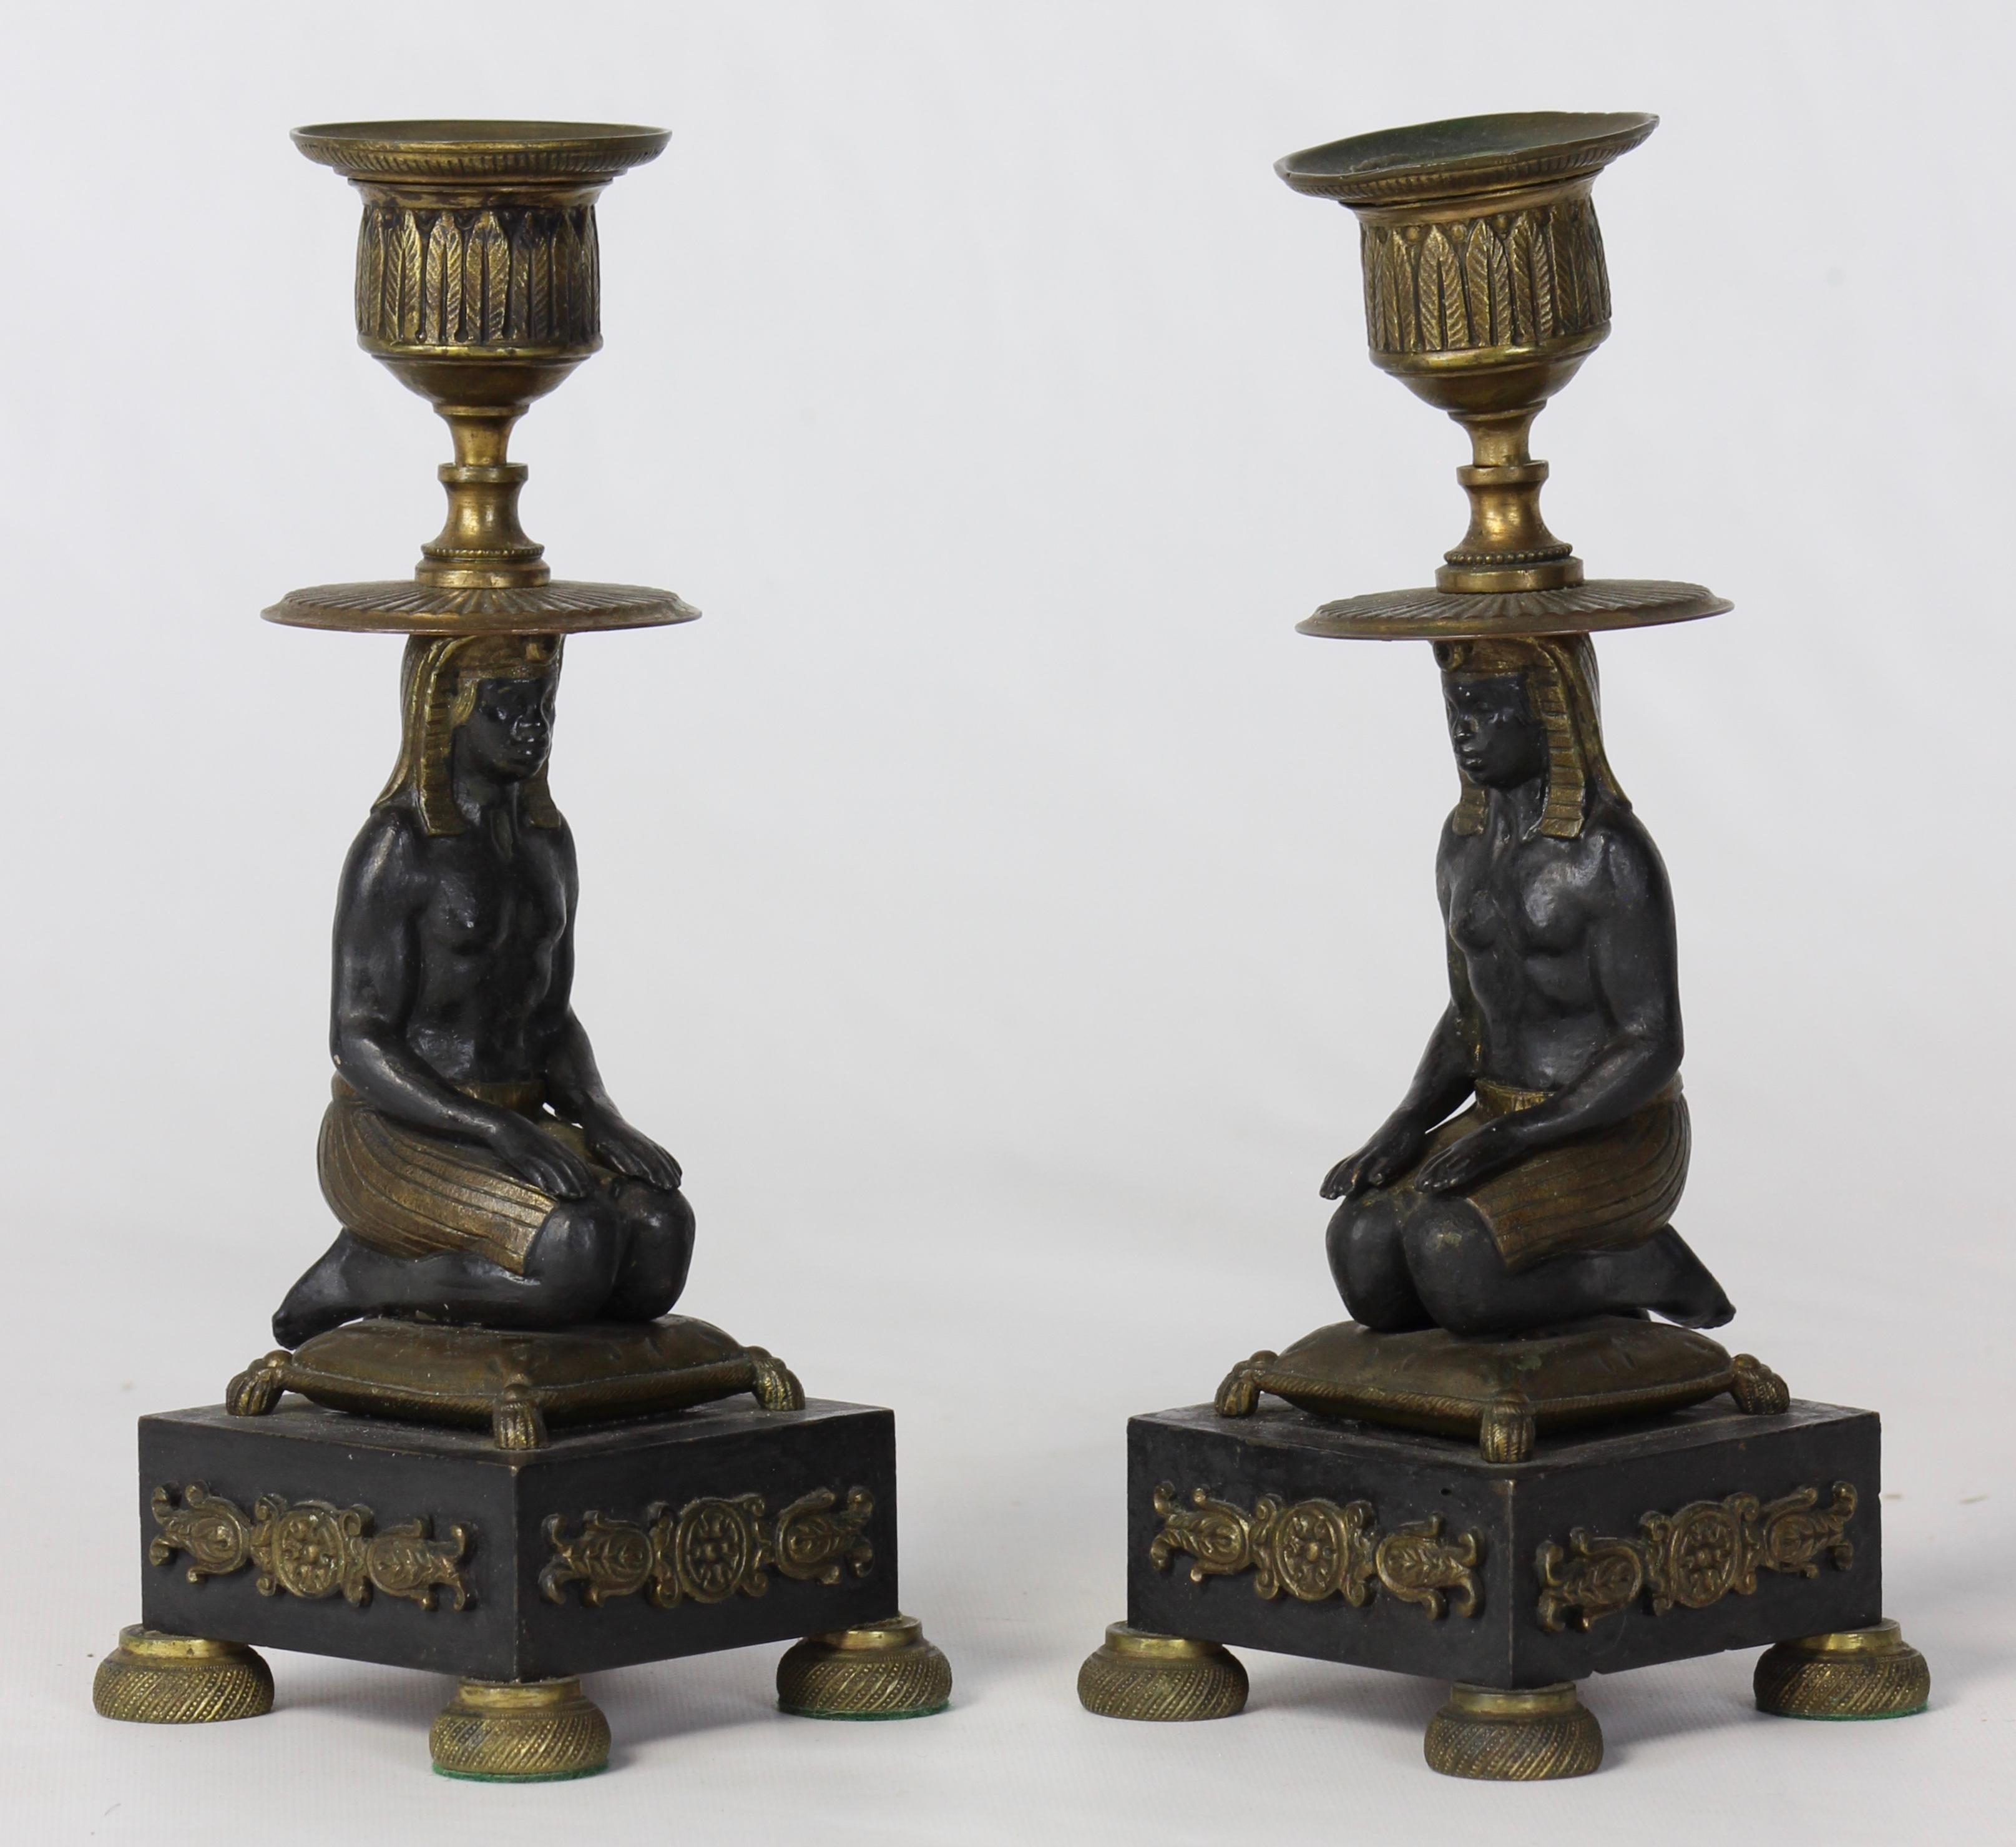 French Pair of Early 19th Century Egyptian Revival Candlesticks